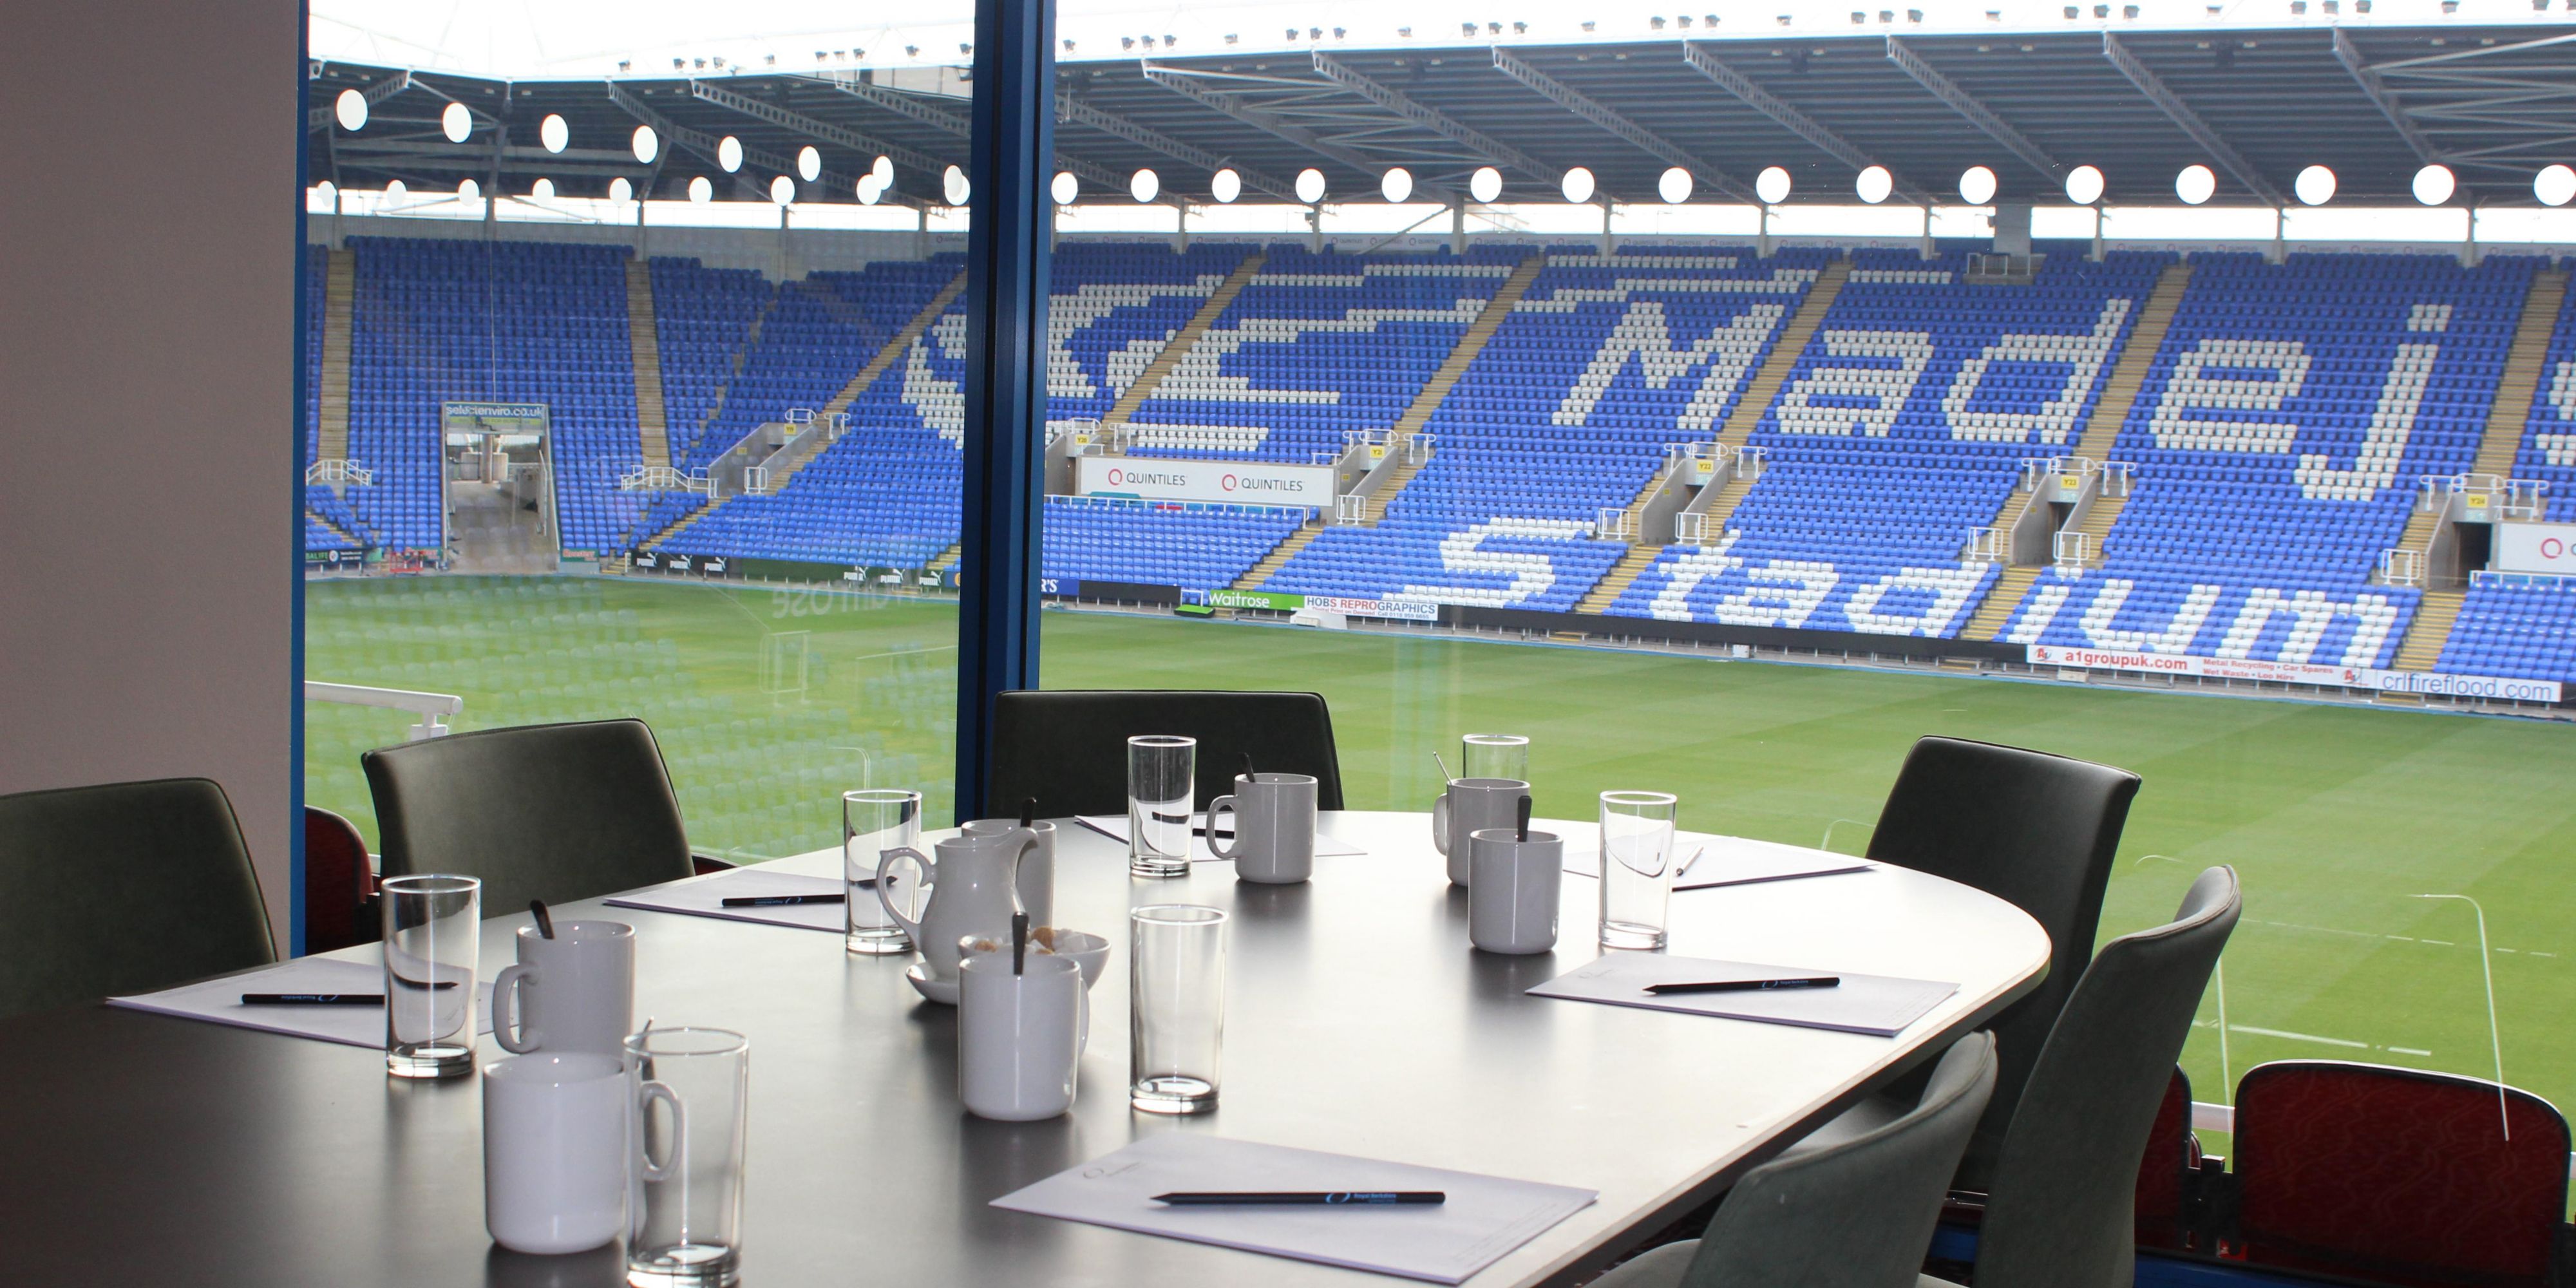 High capacity onsite Conference Centre with the Reading FC Conferences & Events, offering 32 flexible meetings and events spaces for up to 500 people, directly connected to the hotel within the Madejski Stadium complex